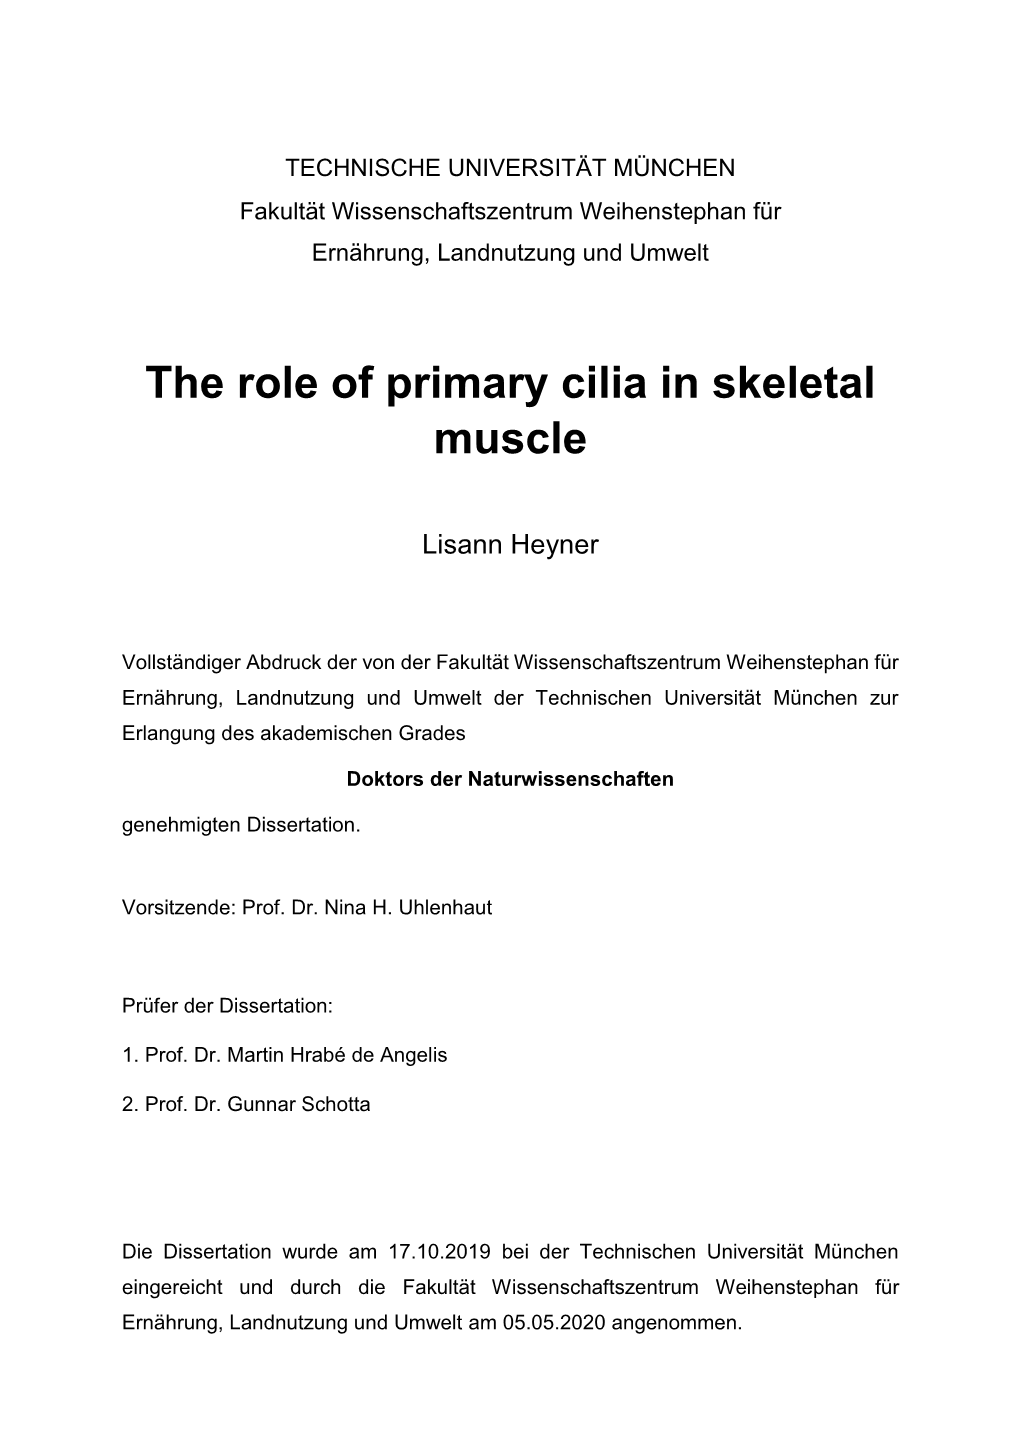 The Role of Primary Cilia in Skeletal Muscle